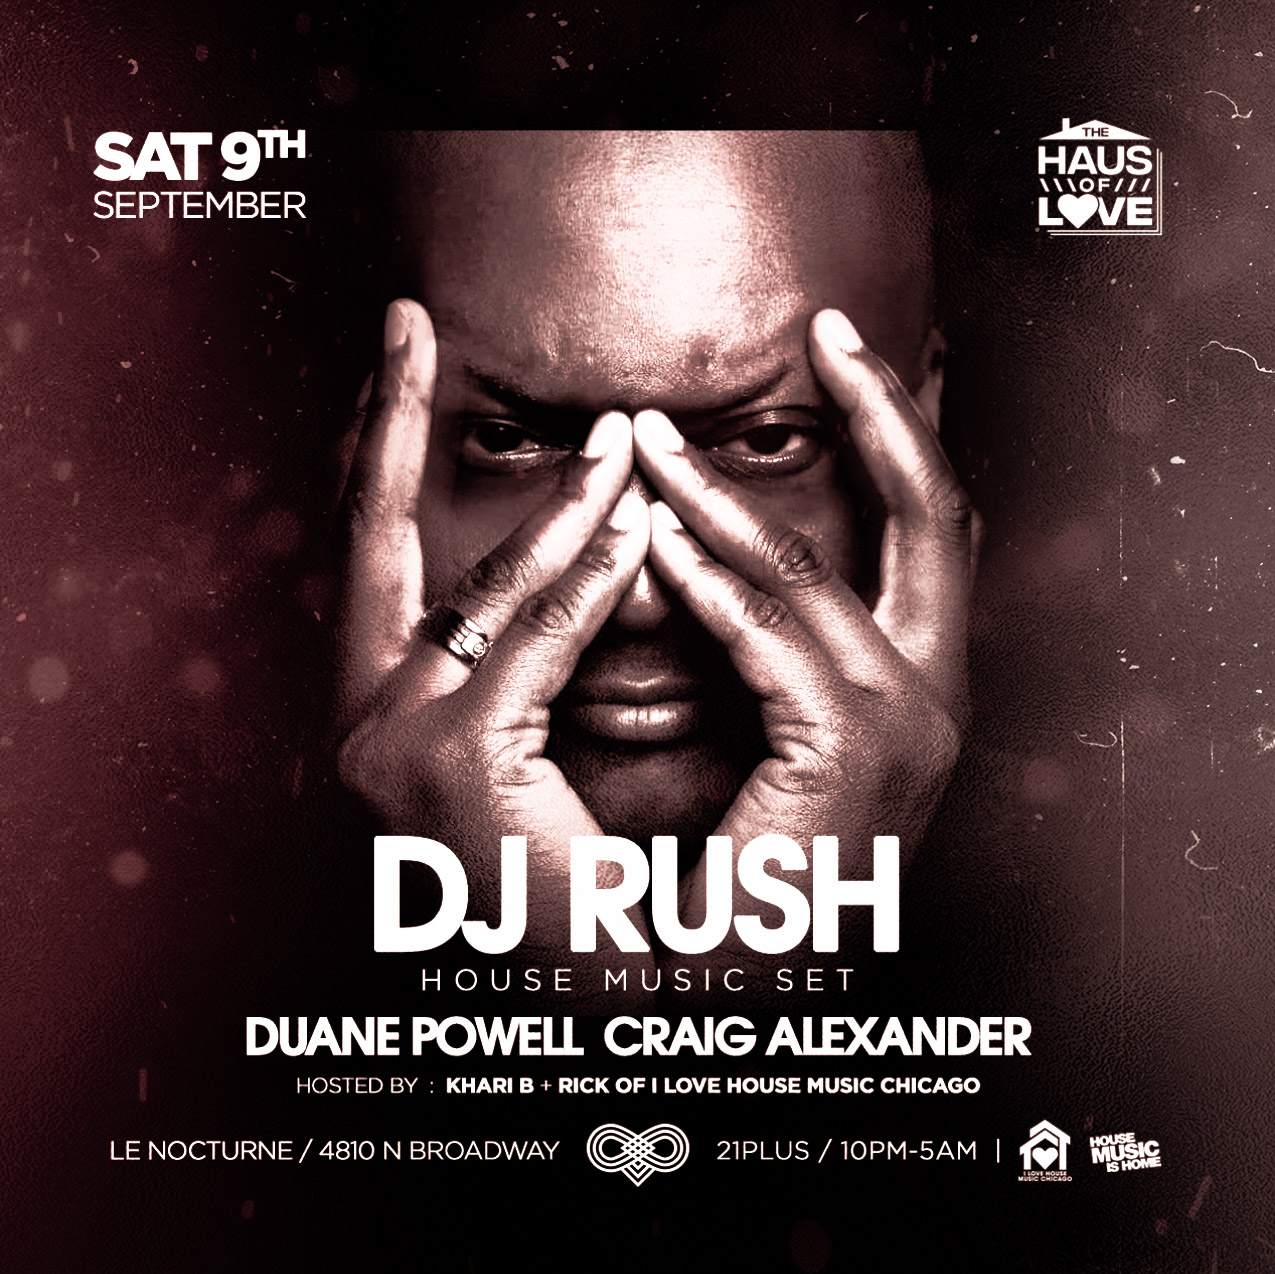 The Legend Returns. A DJ Rush House Music Set Has Sold Out - Página frontal